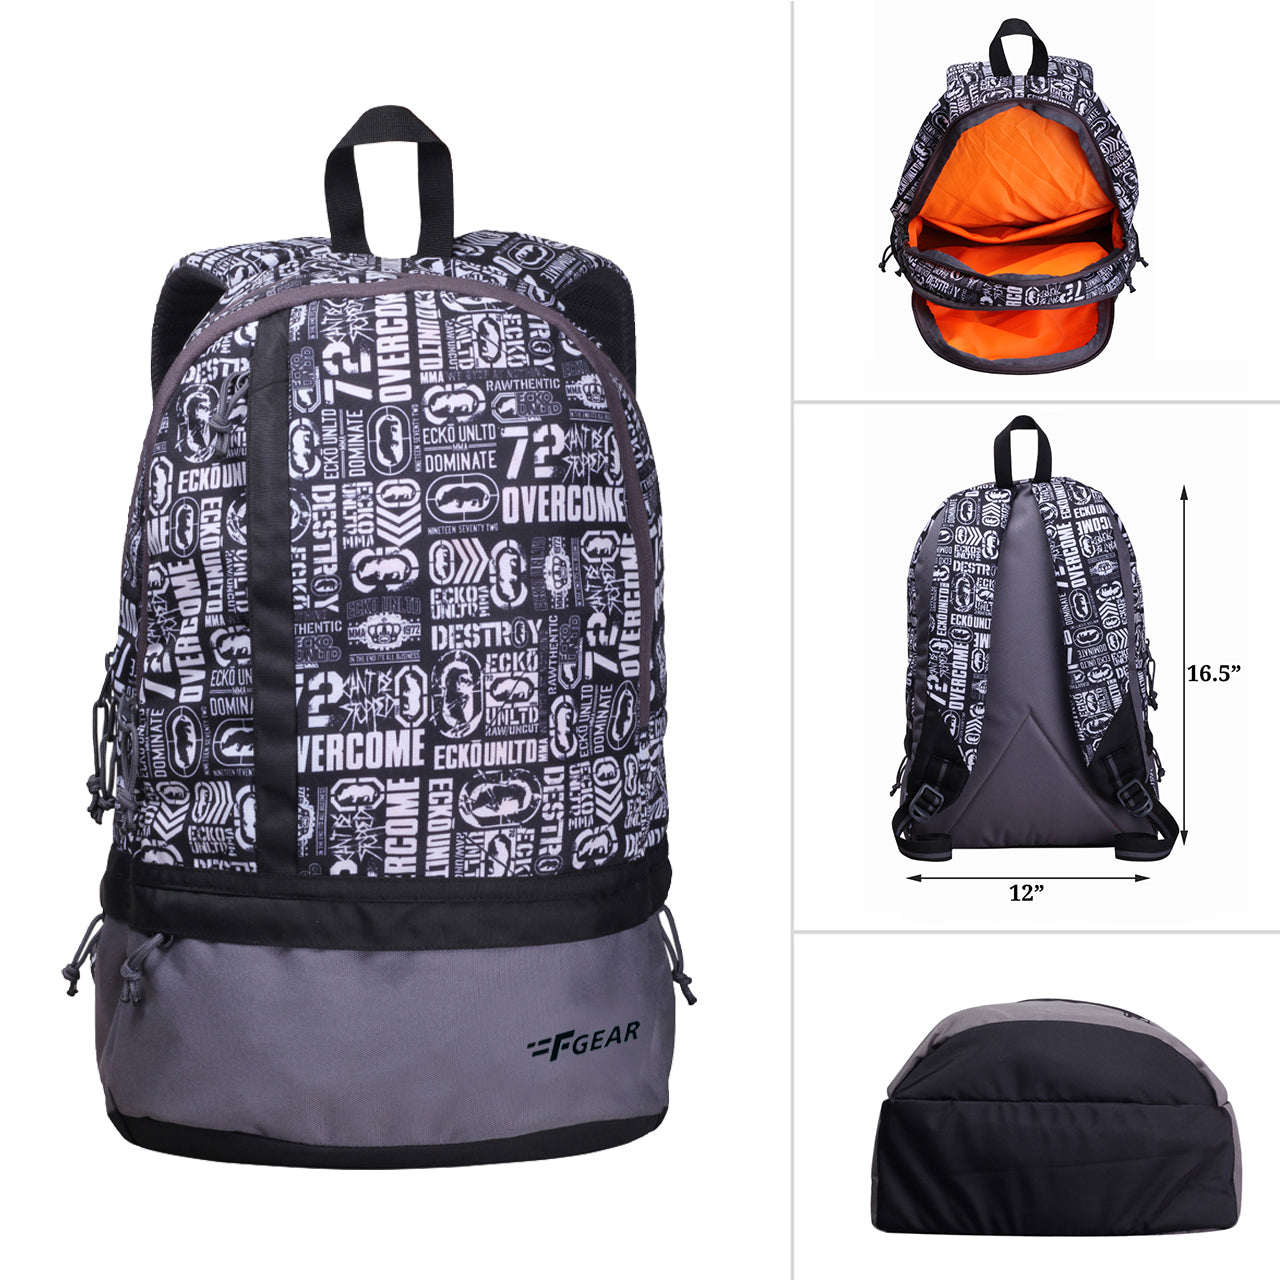 Pin on Backpacks, Outdoor gear, Bags